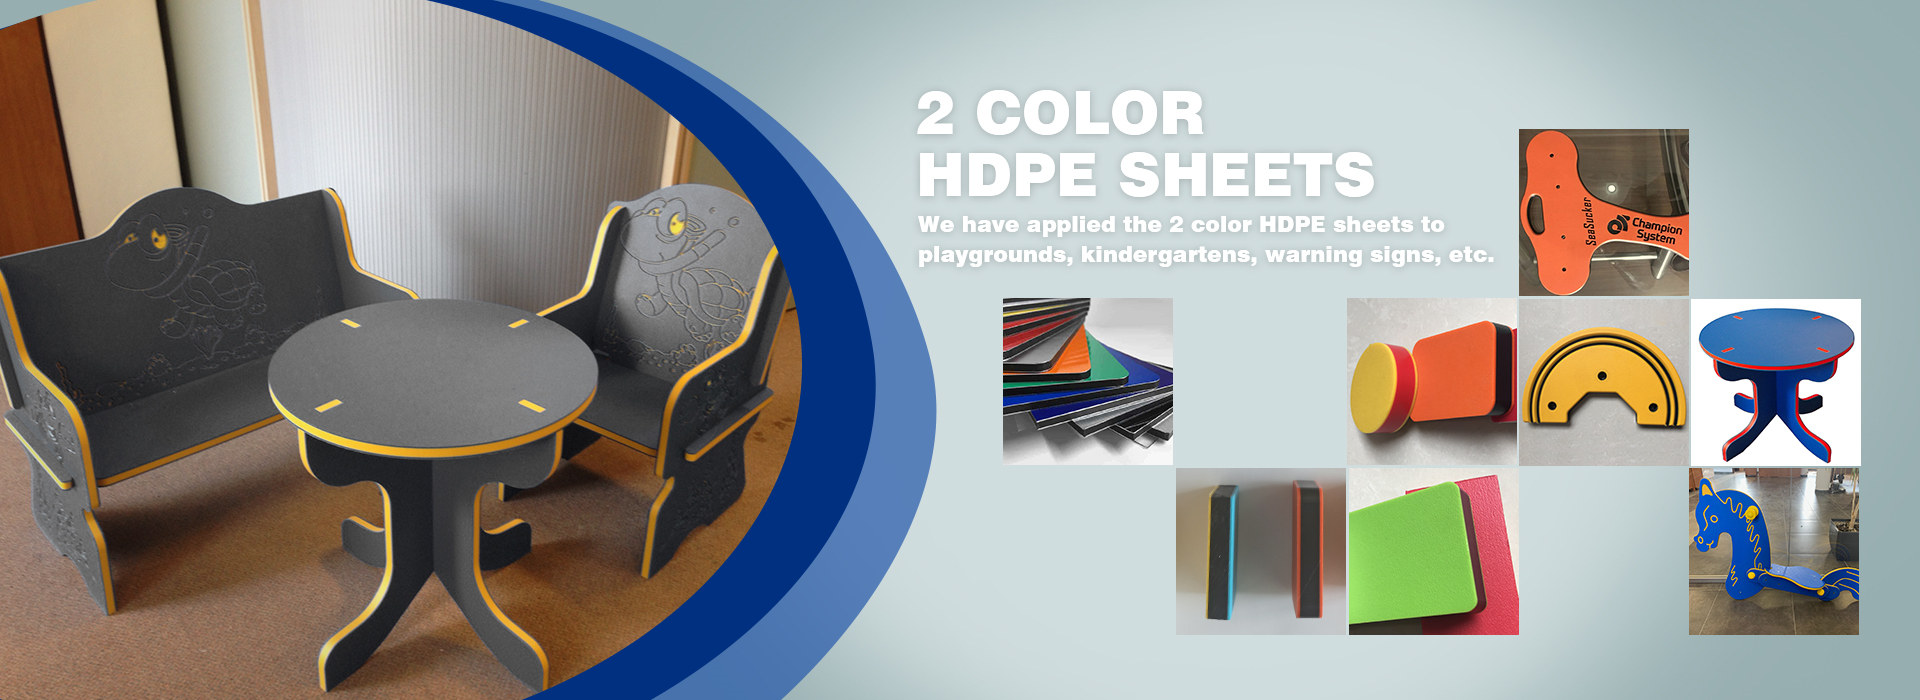 two color hdpe sheet 02